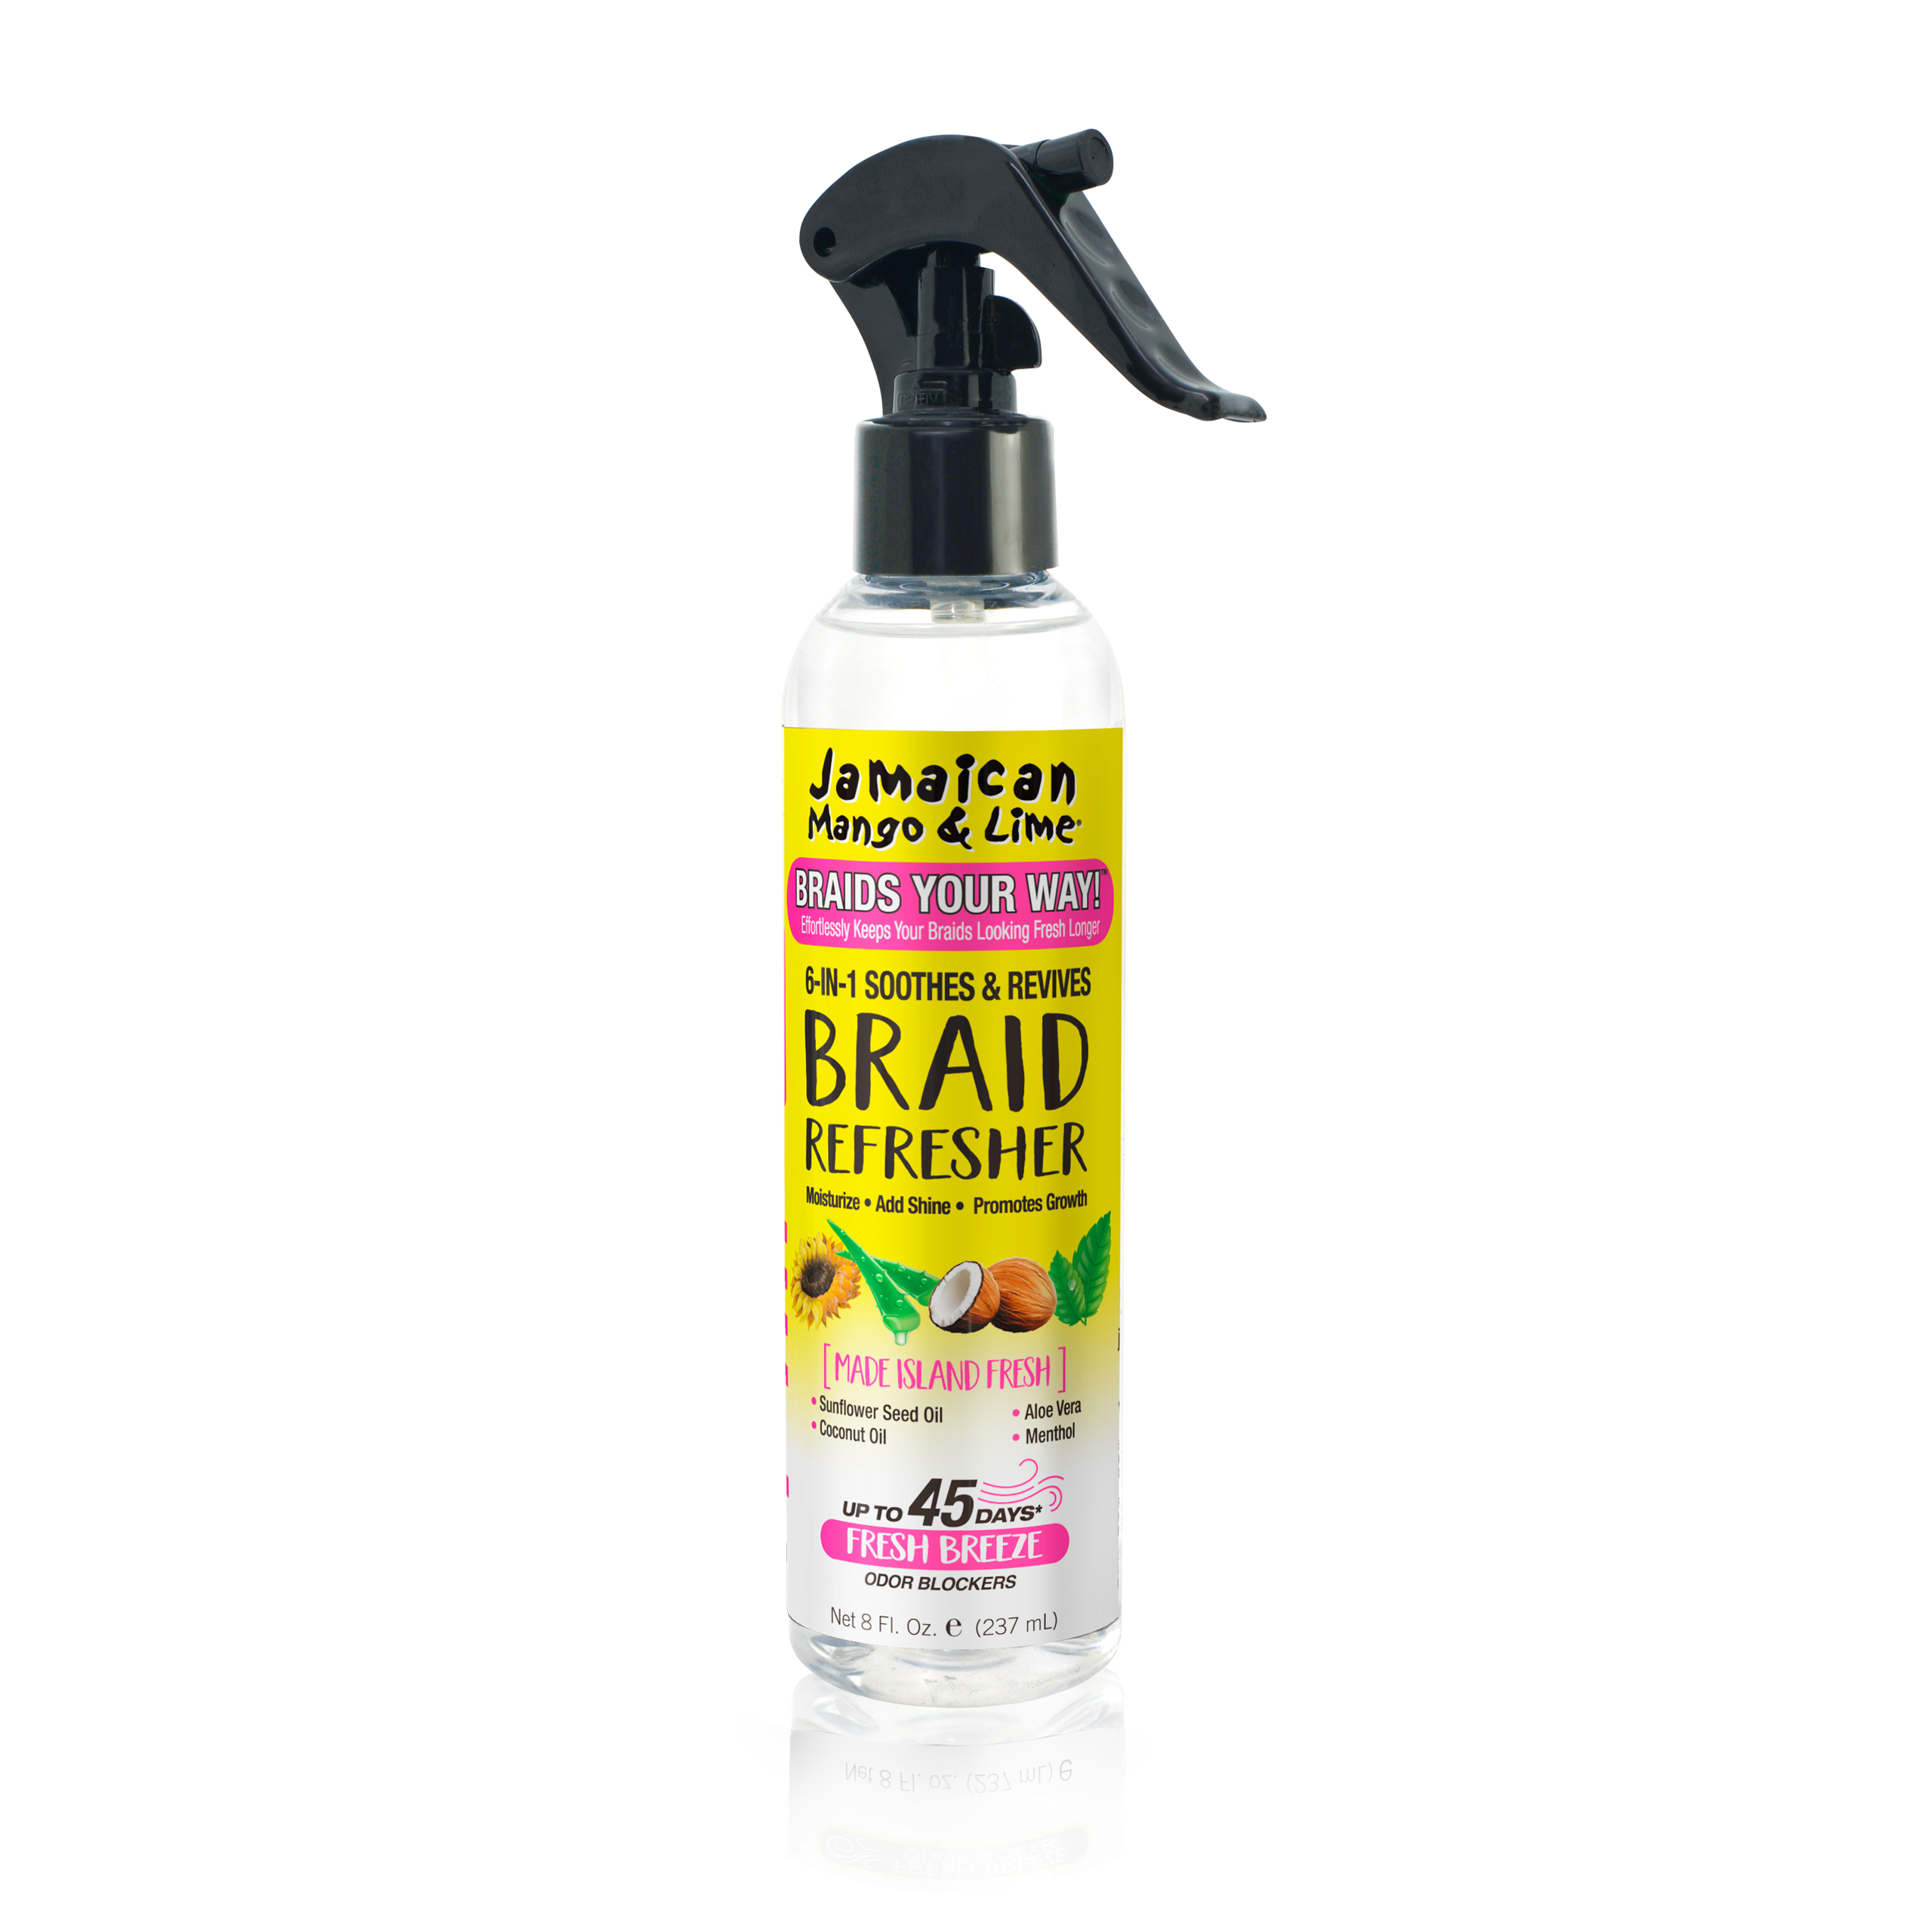 Jamaican Mango & Lime - 6-in-1 Soothes & Revives Braid Refresher 237ml